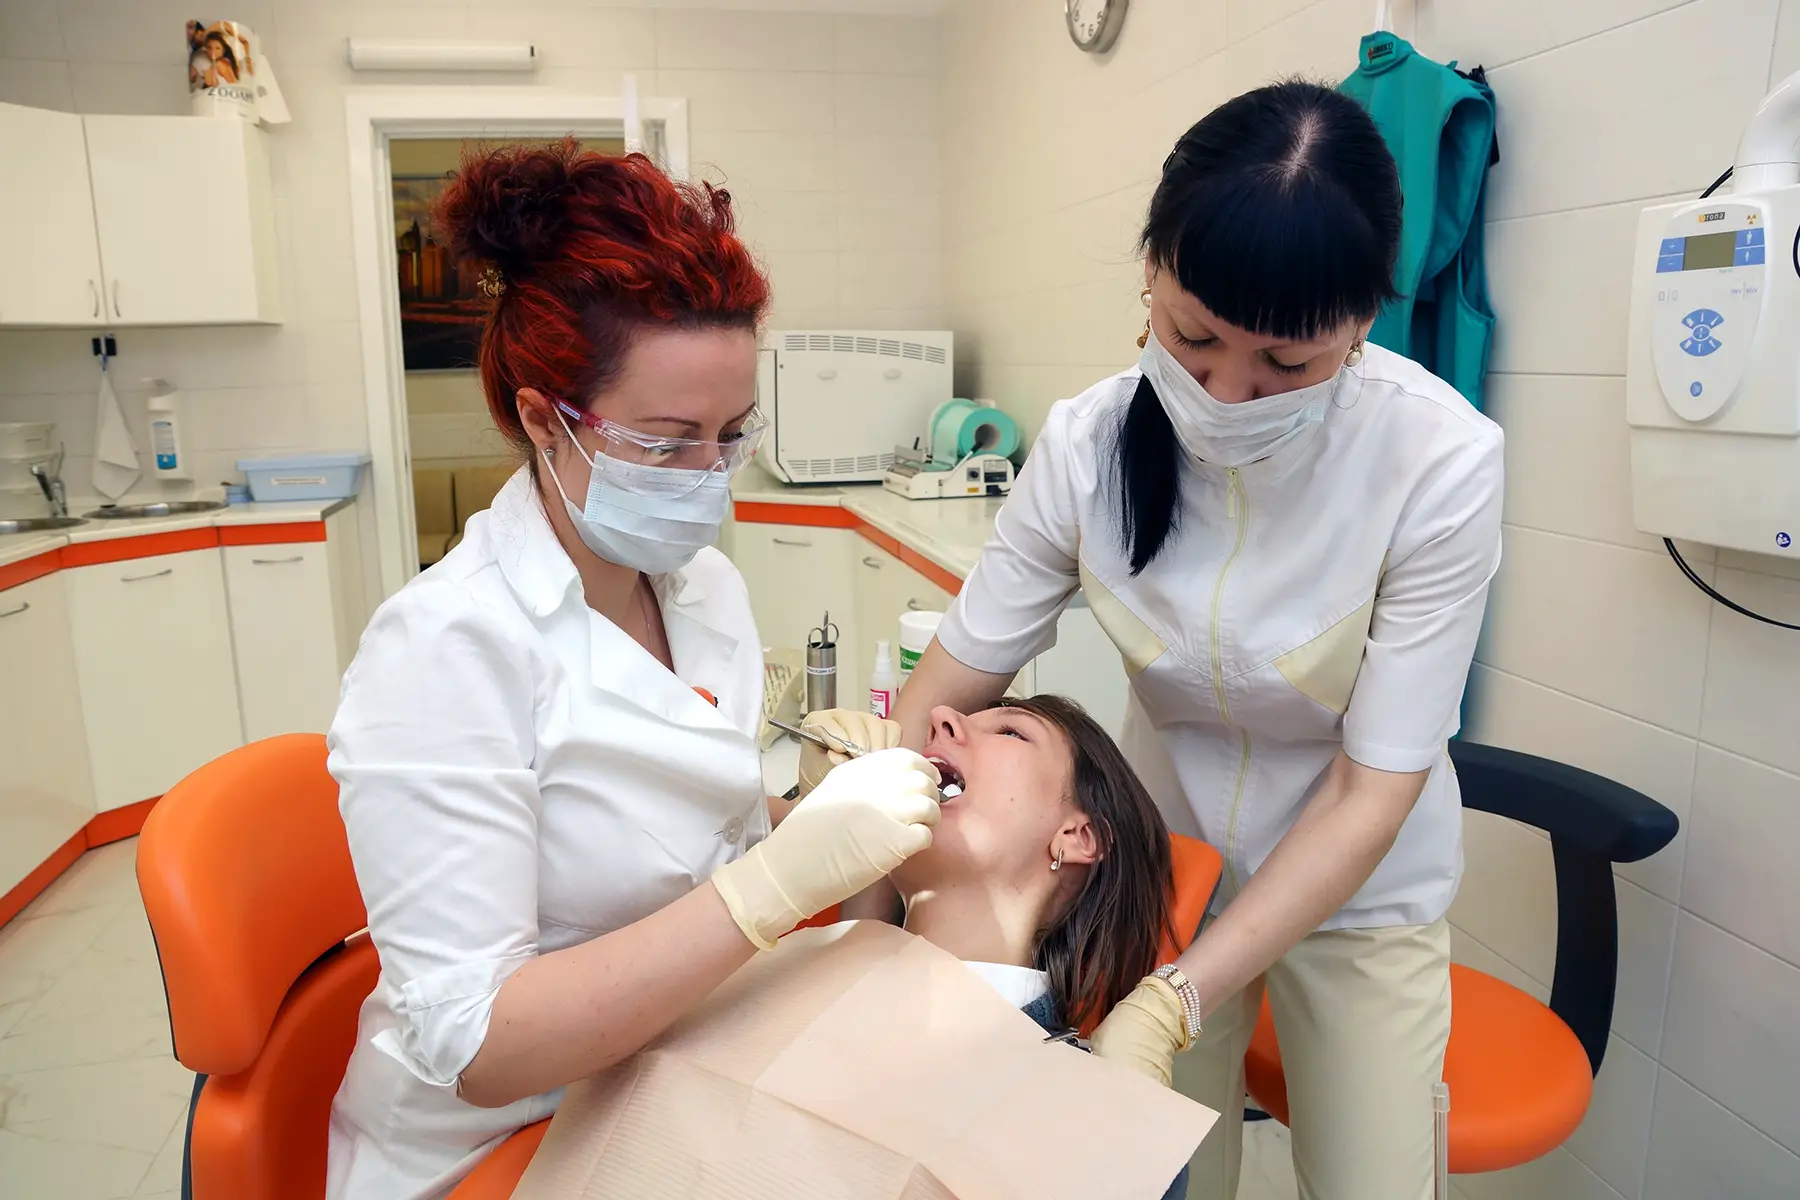 Two dentists carrying out a procedure on a patient